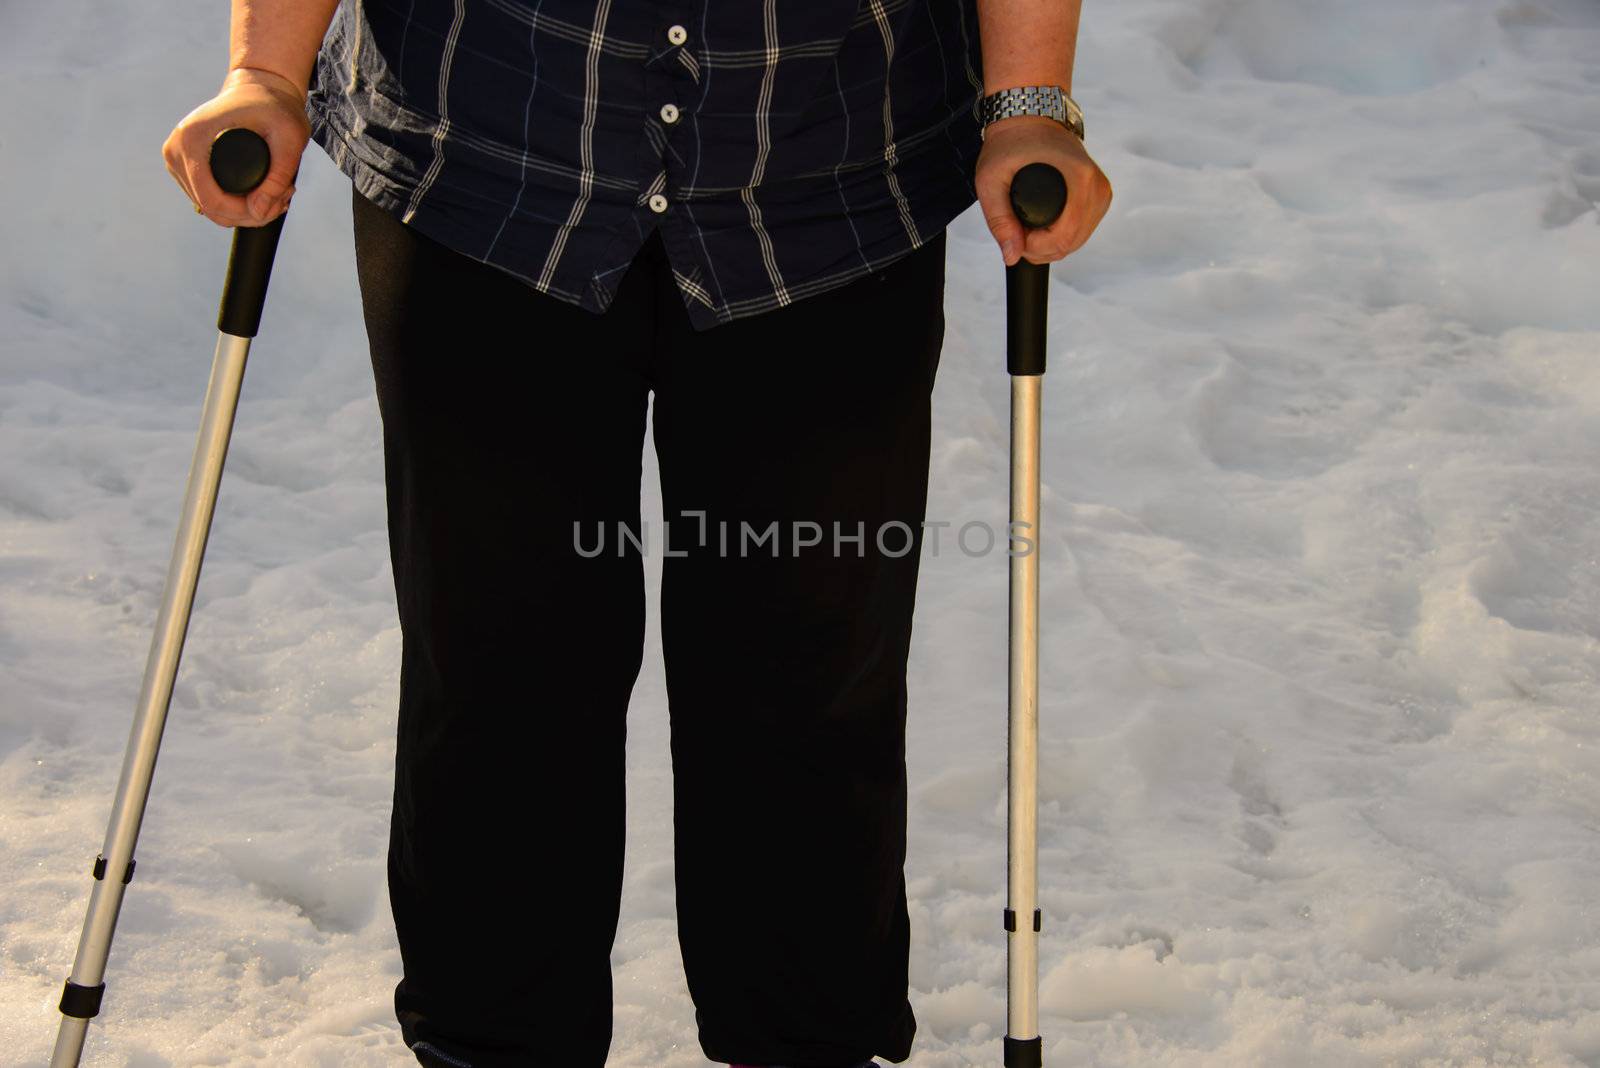 An obese woman waking with crutches outdour in the snow.